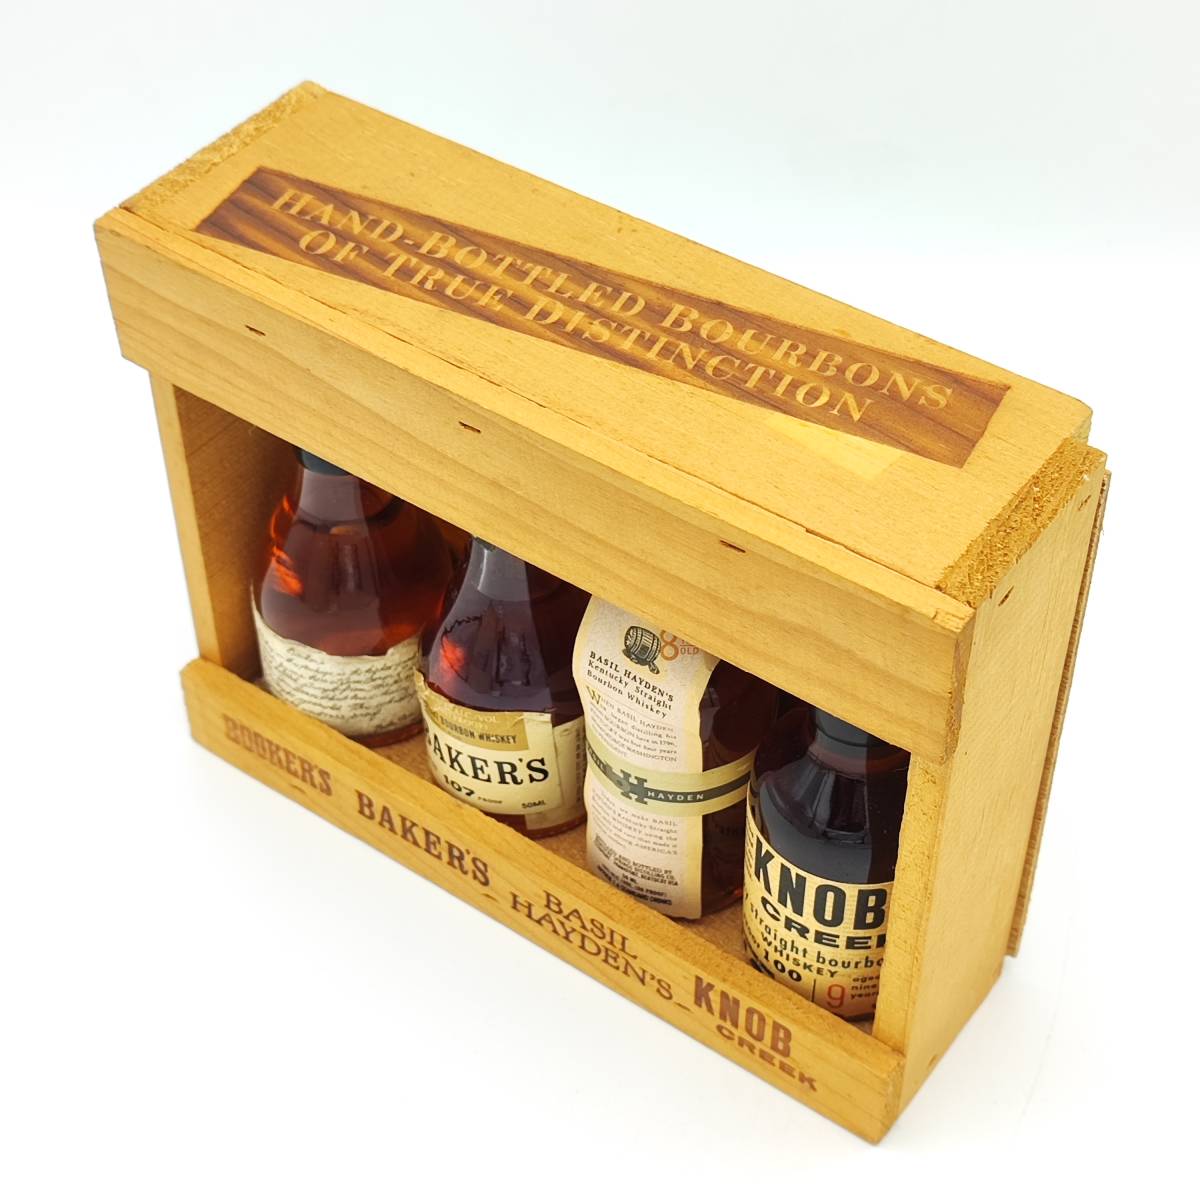 [ nationwide free shipping ]HAND BOTTLED BOURBONS OF TRUE DISTINCTION each 50ml[ Bookers 8 year BOOKER\'S BAKER\'S BASIL HAYDEN\'S KNOB CREEK]